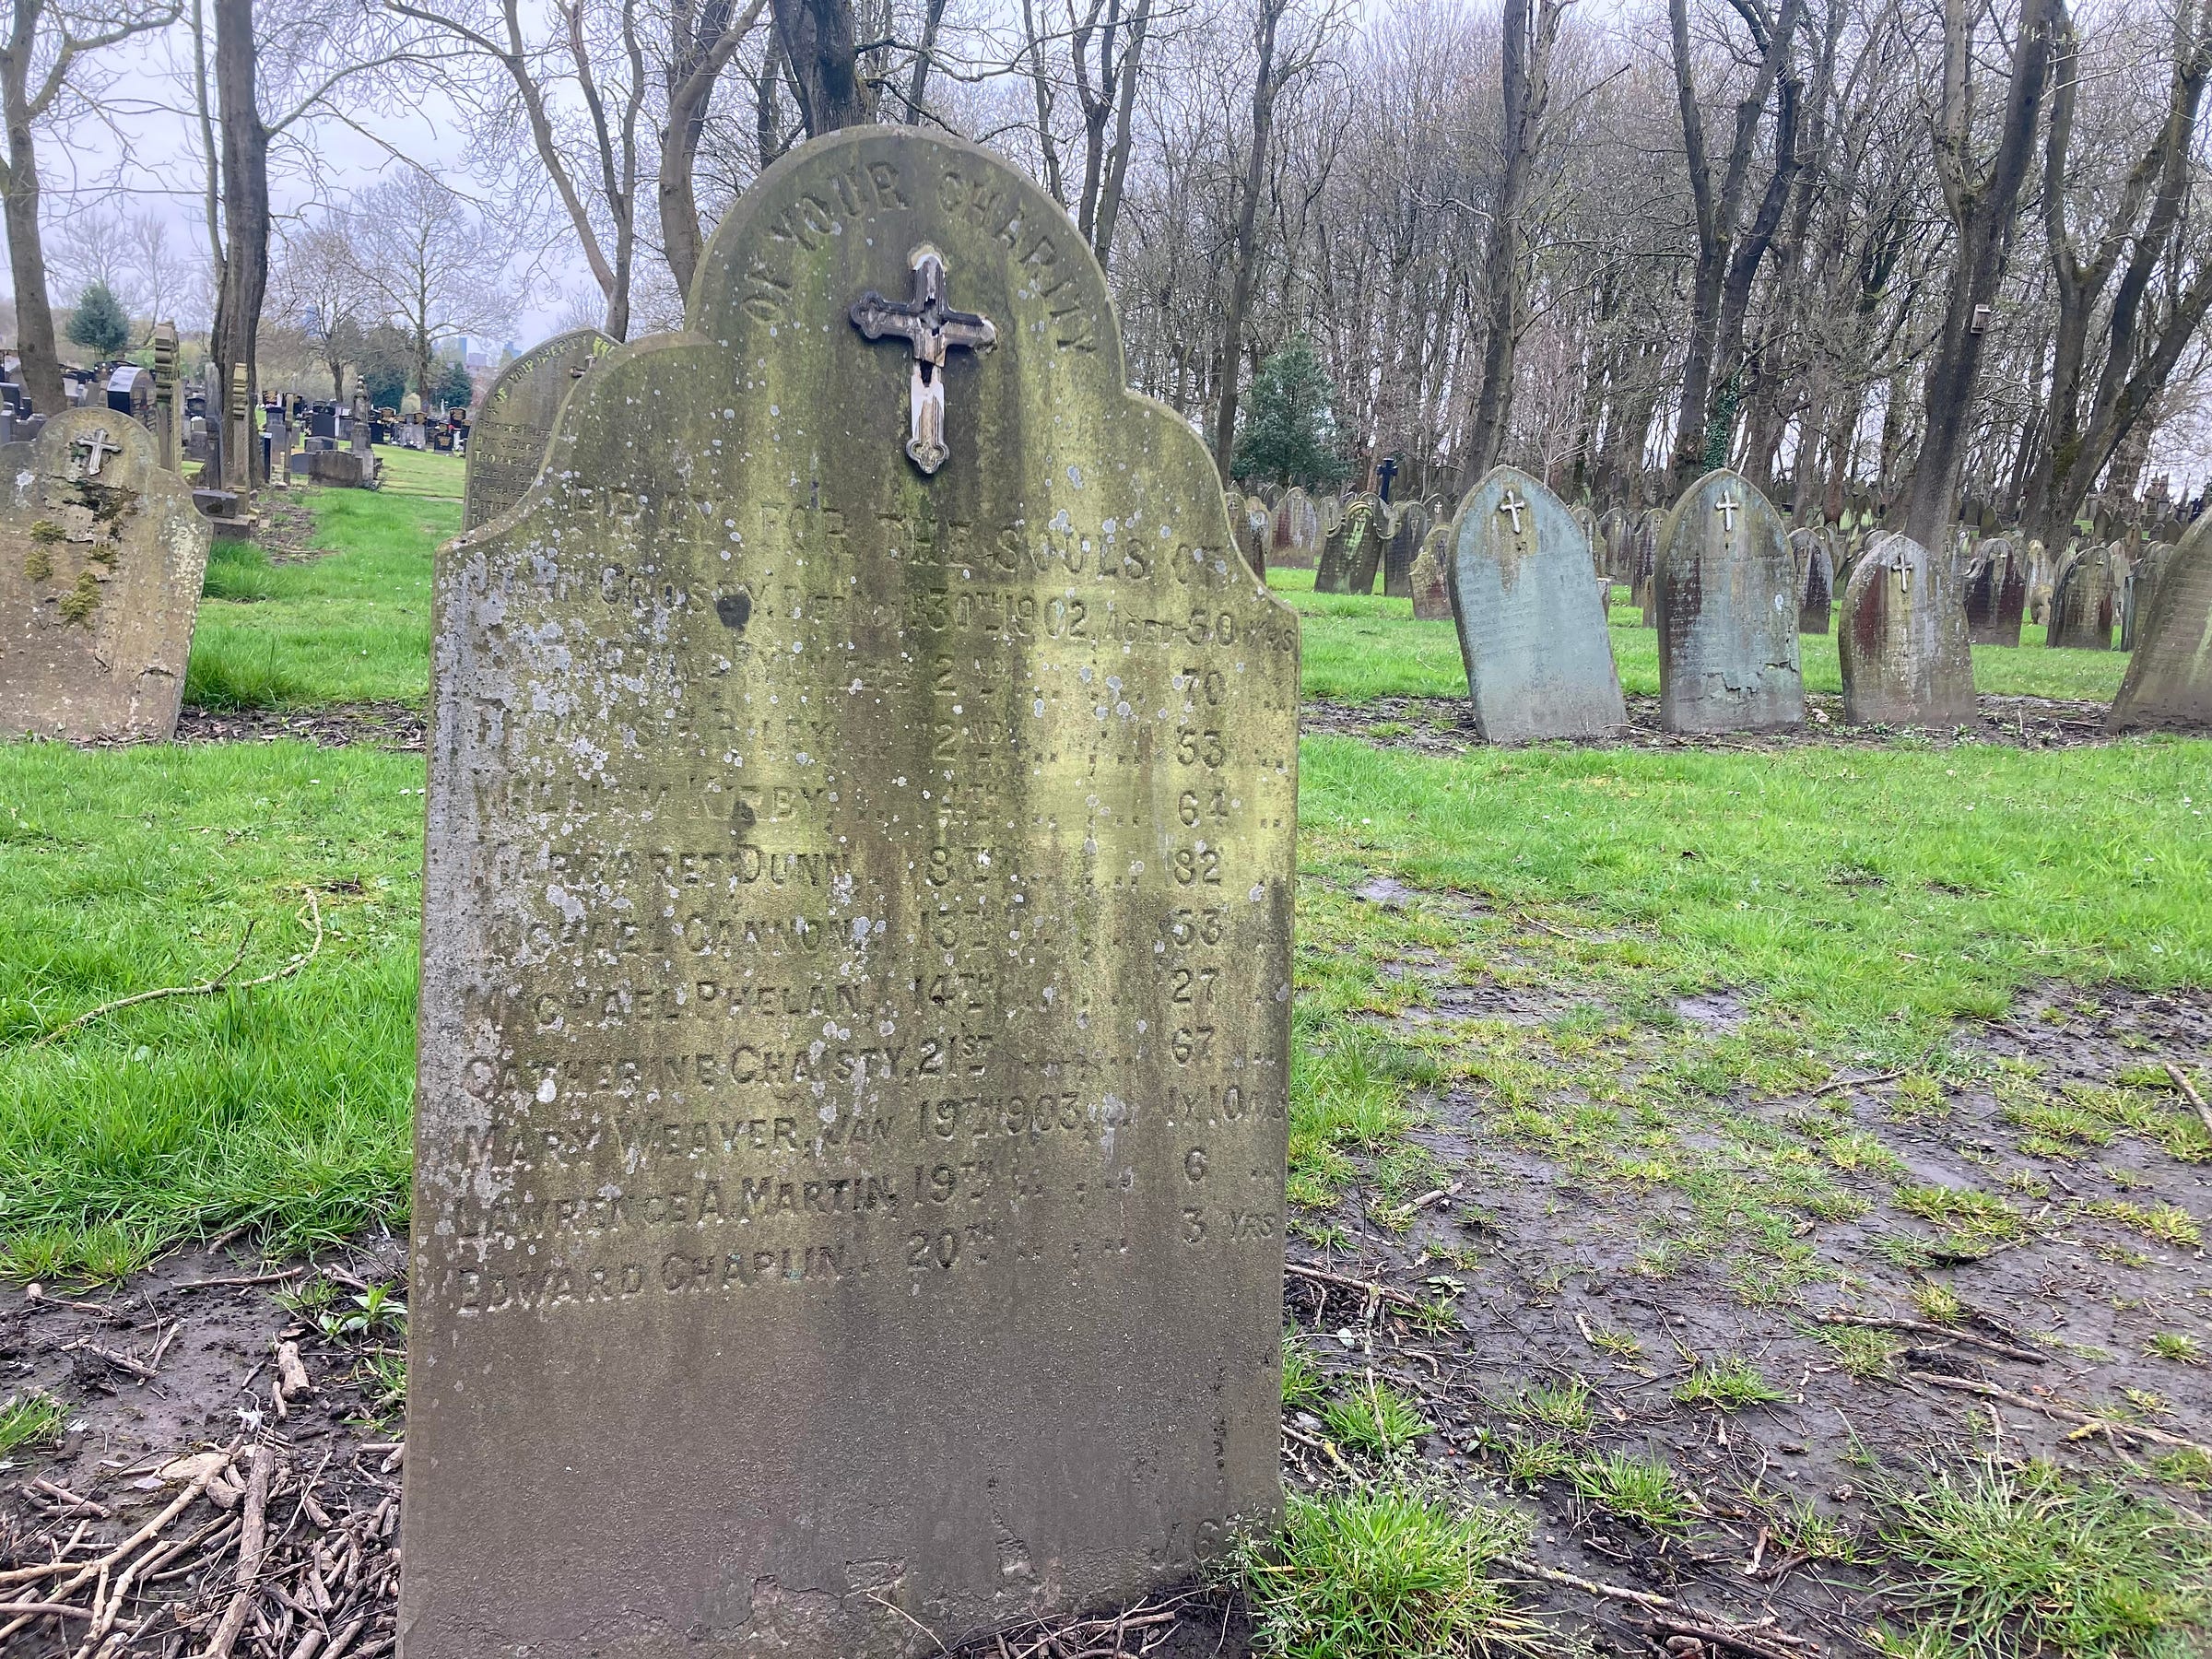 Photograph of an old graveyard and the tombstone of William Kirby, it is his gravesite in Manchester.